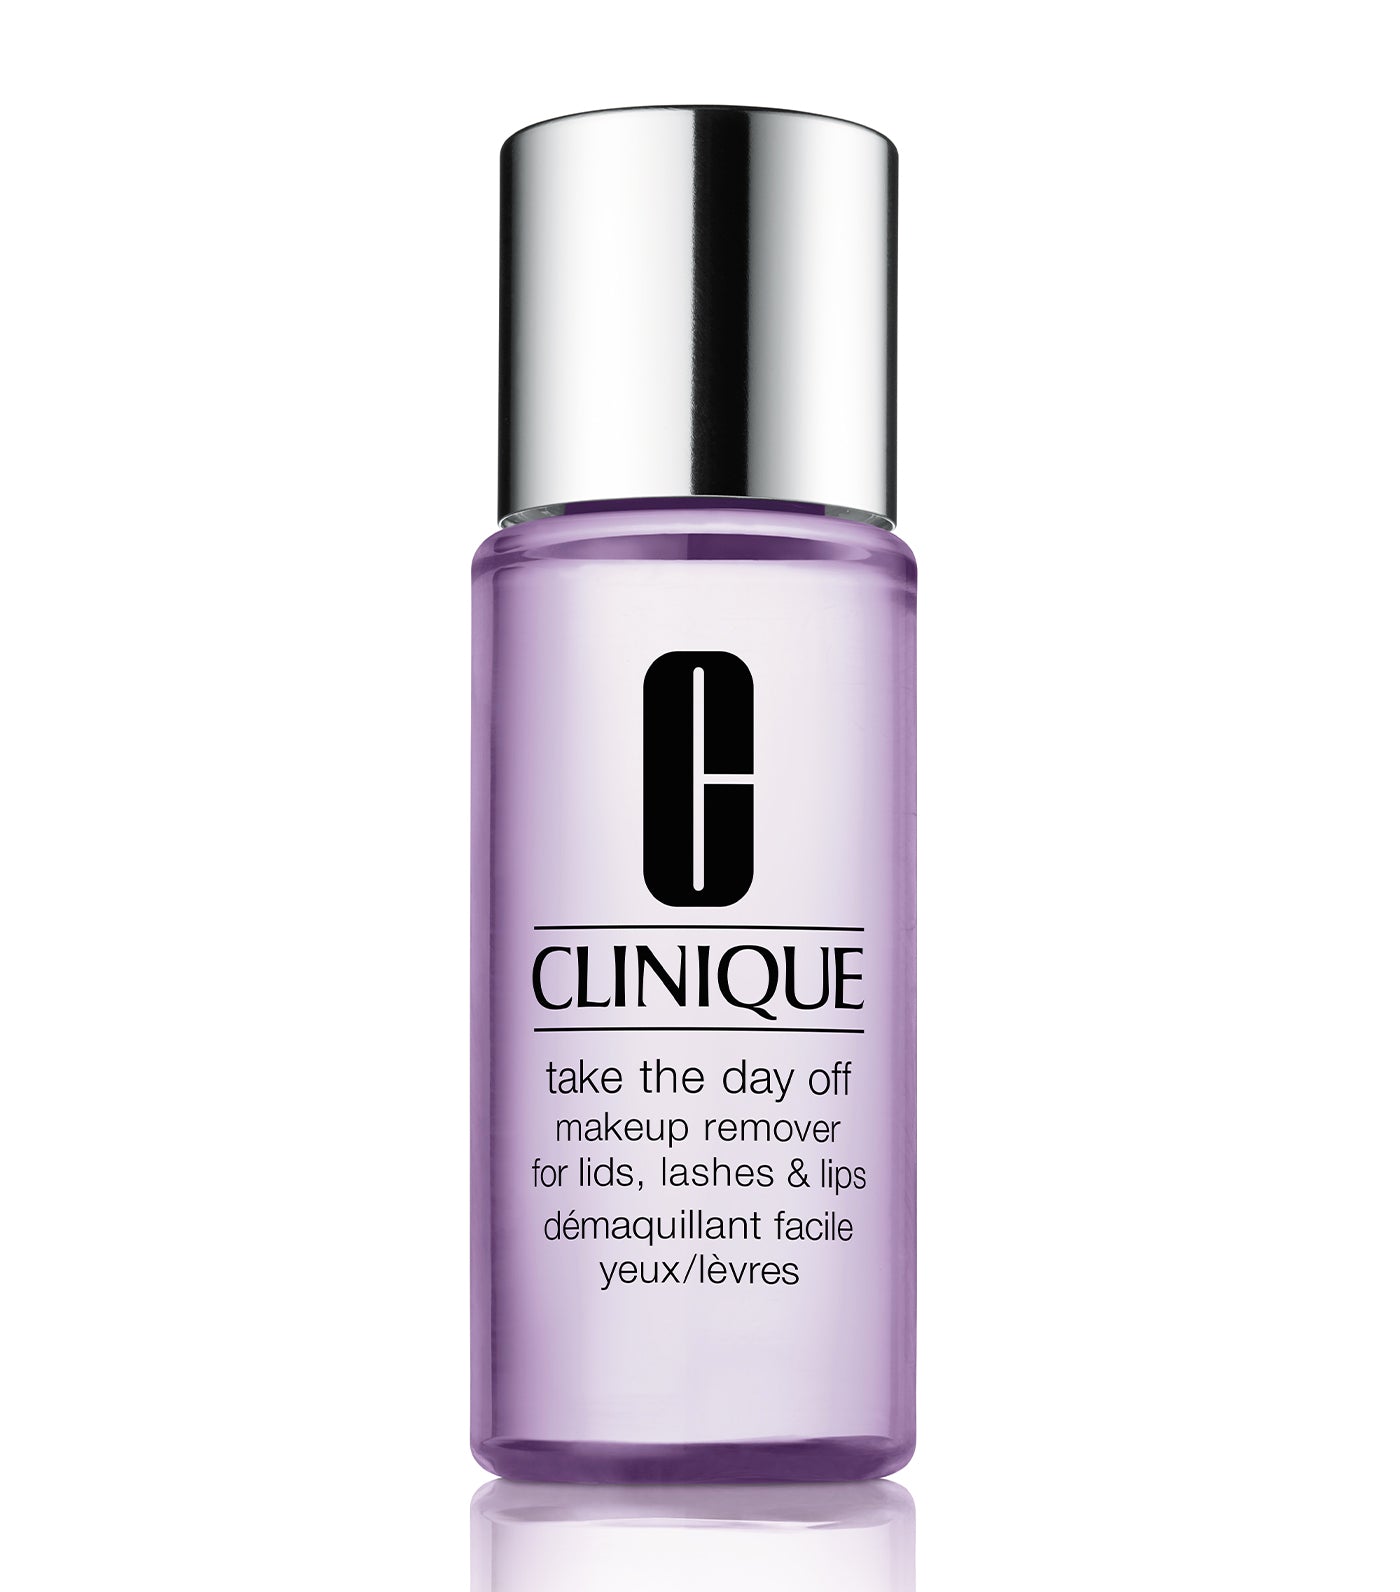 Clinique Free Take The Day Off Makeup Remover For Lids, Lashes & Lips 50ml